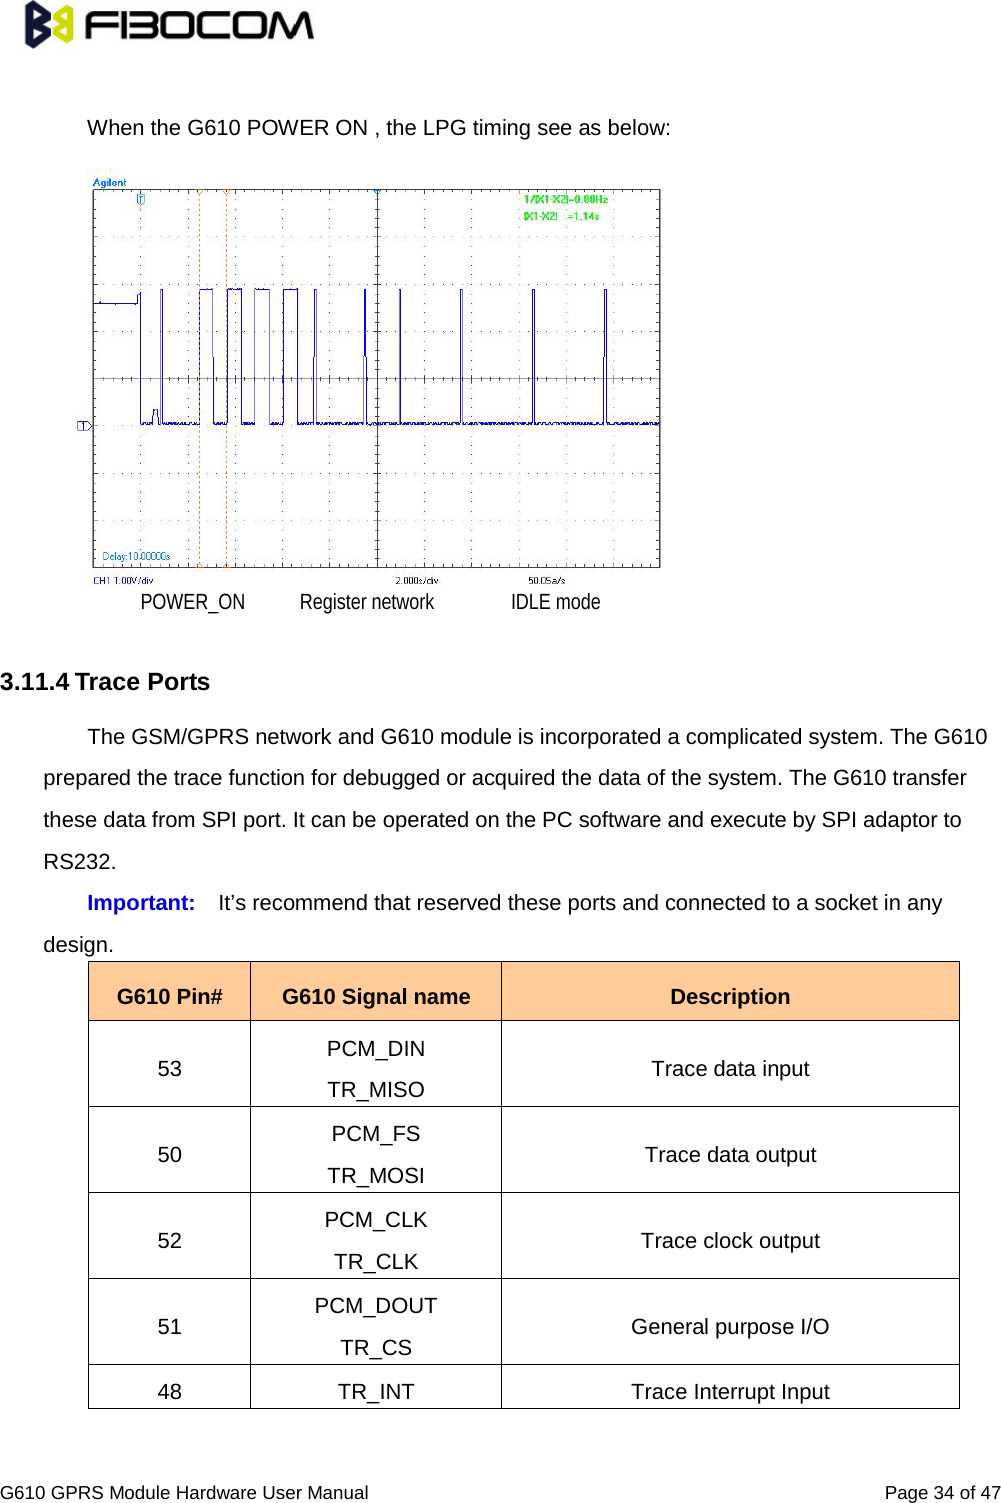                                                                                                          G610 GPRS Module Hardware User Manual                                                          Page 34 of 47   When the G610 POWER ON , the LPG timing see as below:               3.11.4 Trace Ports   The GSM/GPRS network and G610 module is incorporated a complicated system. The G610 prepared the trace function for debugged or acquired the data of the system. The G610 transfer these data from SPI port. It can be operated on the PC software and execute by SPI adaptor to RS232.   Important: It’s recommend that reserved these ports and connected to a socket in any design.   G610 Pin# G610 Signal name Description 53 PCM_DIN TR_MISO Trace data input 50 PCM_FS TR_MOSI Trace data output 52 PCM_CLK TR_CLK Trace clock output 51 PCM_DOUT TR_CS General purpose I/O 48 TR_INT Trace Interrupt Input  POWER_ON     Register network       IDLE mode 